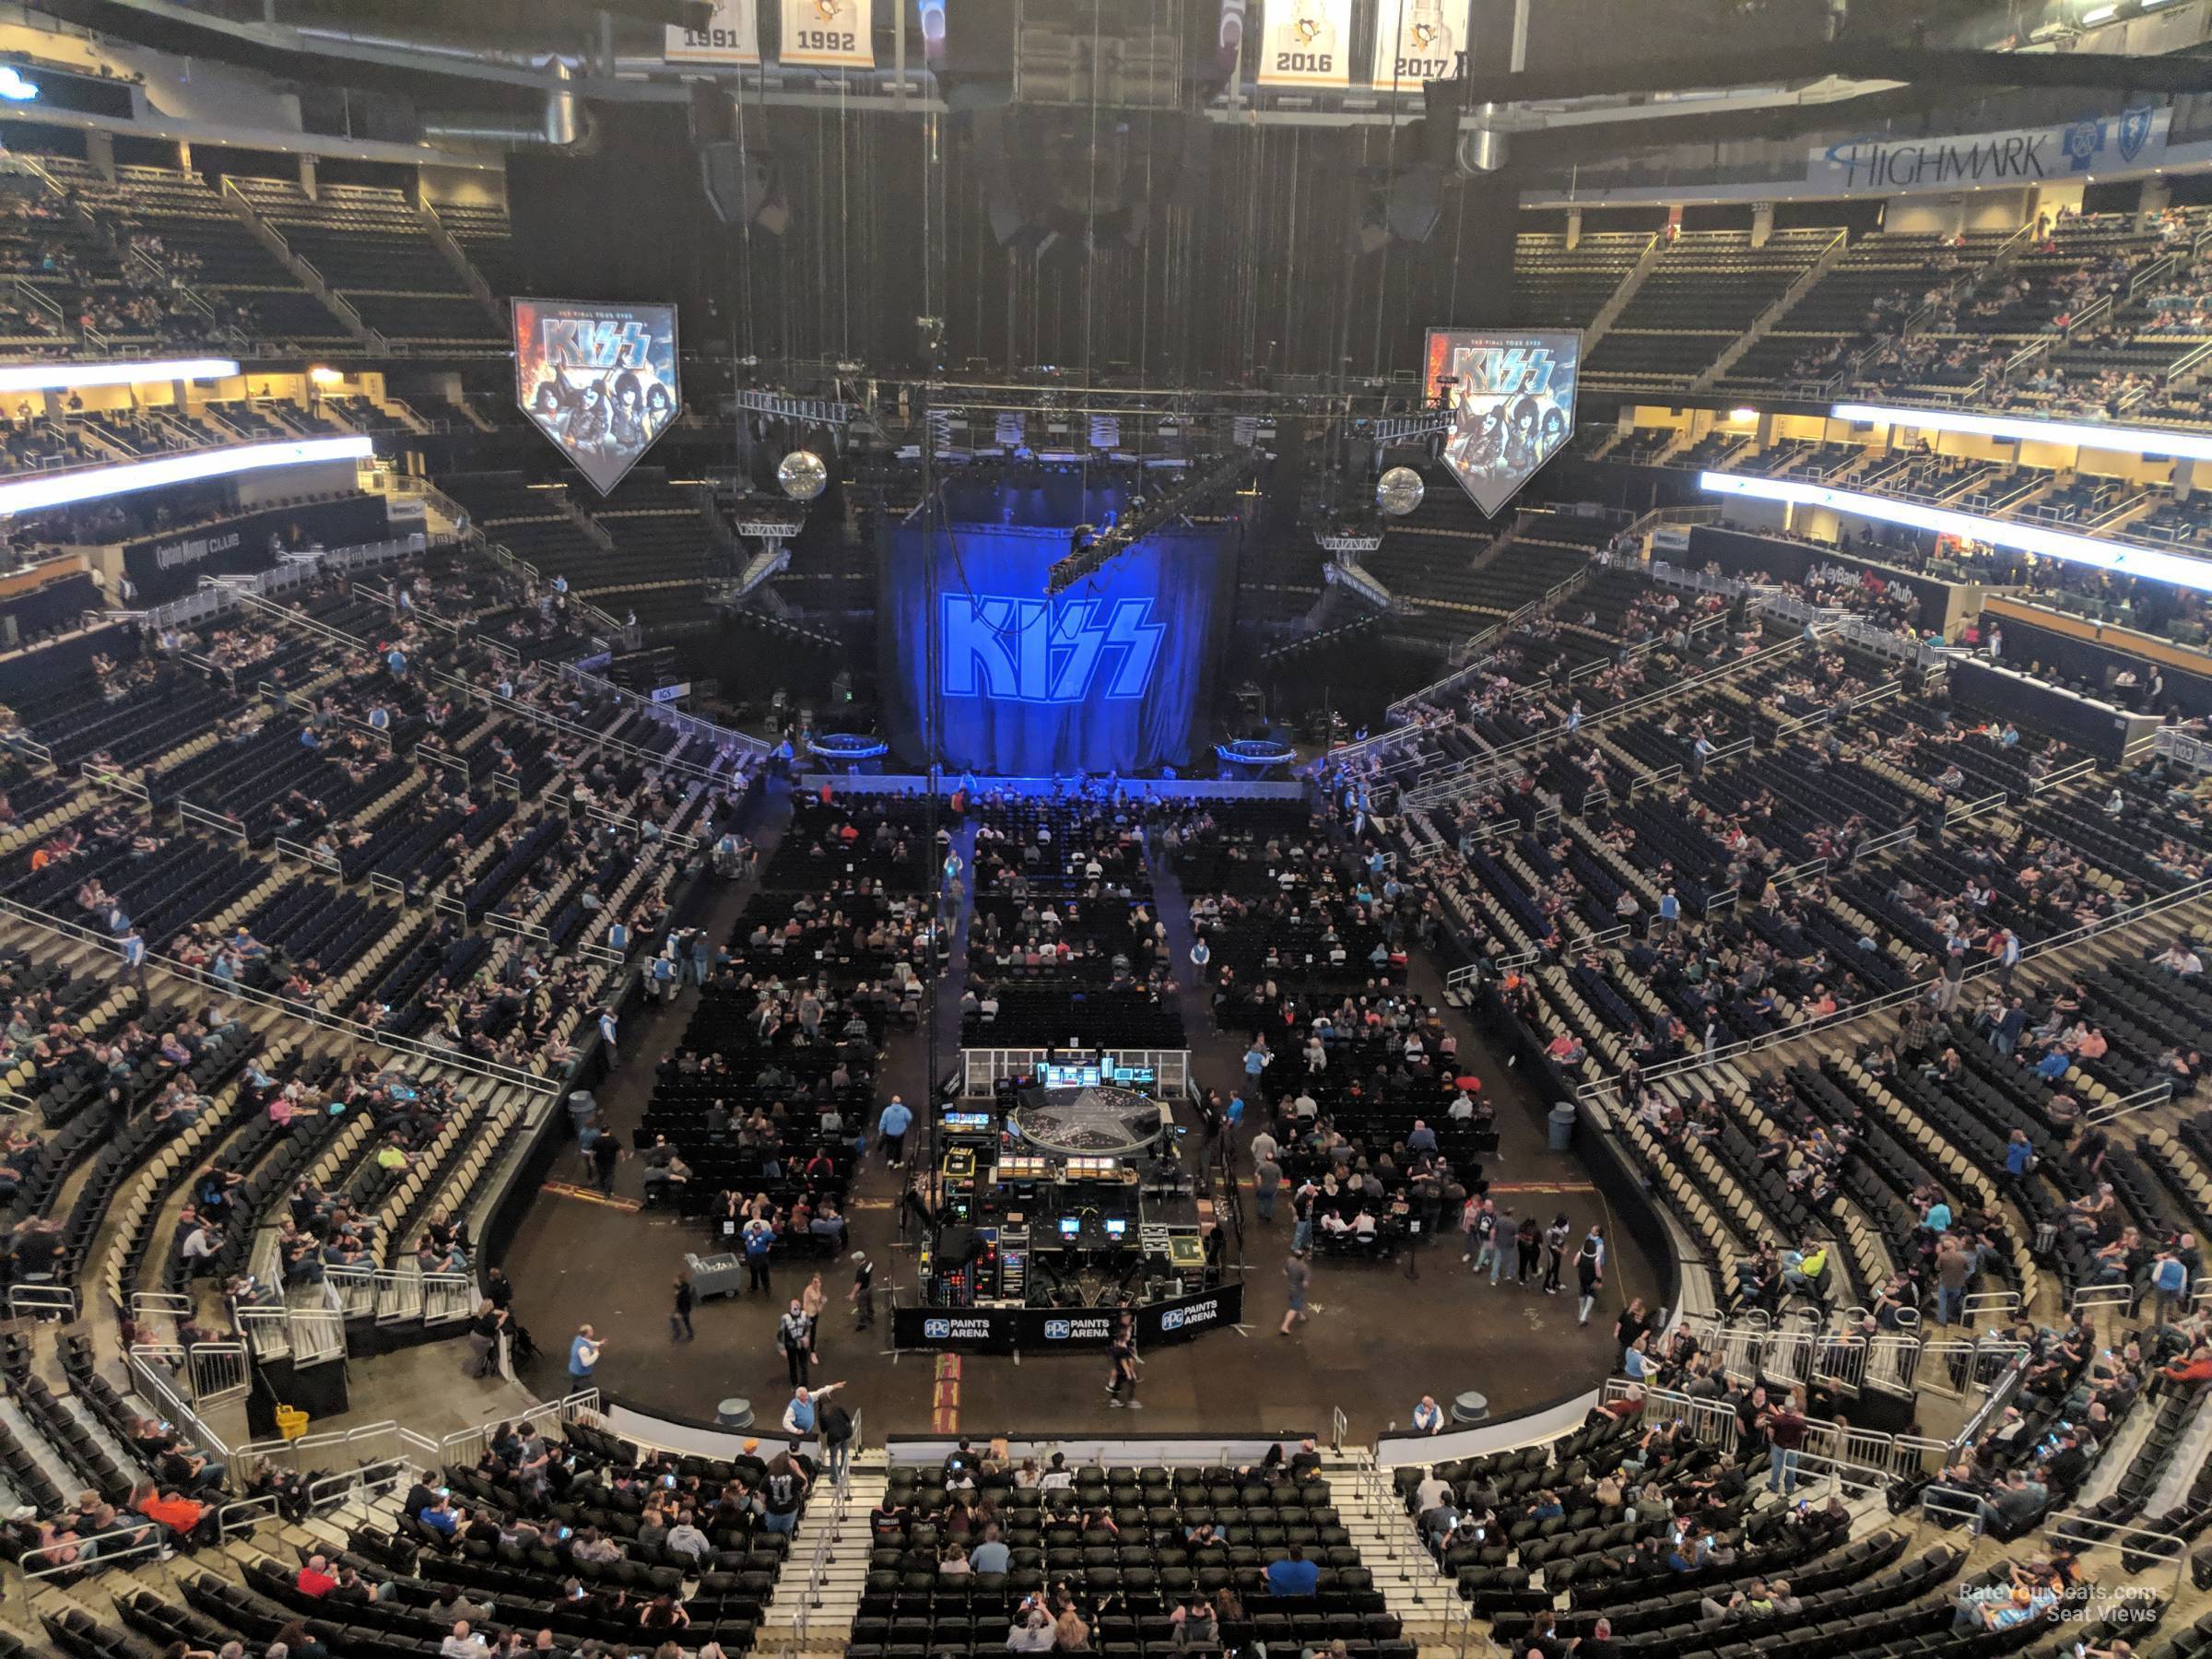 Section 211 at PPG Paints Arena